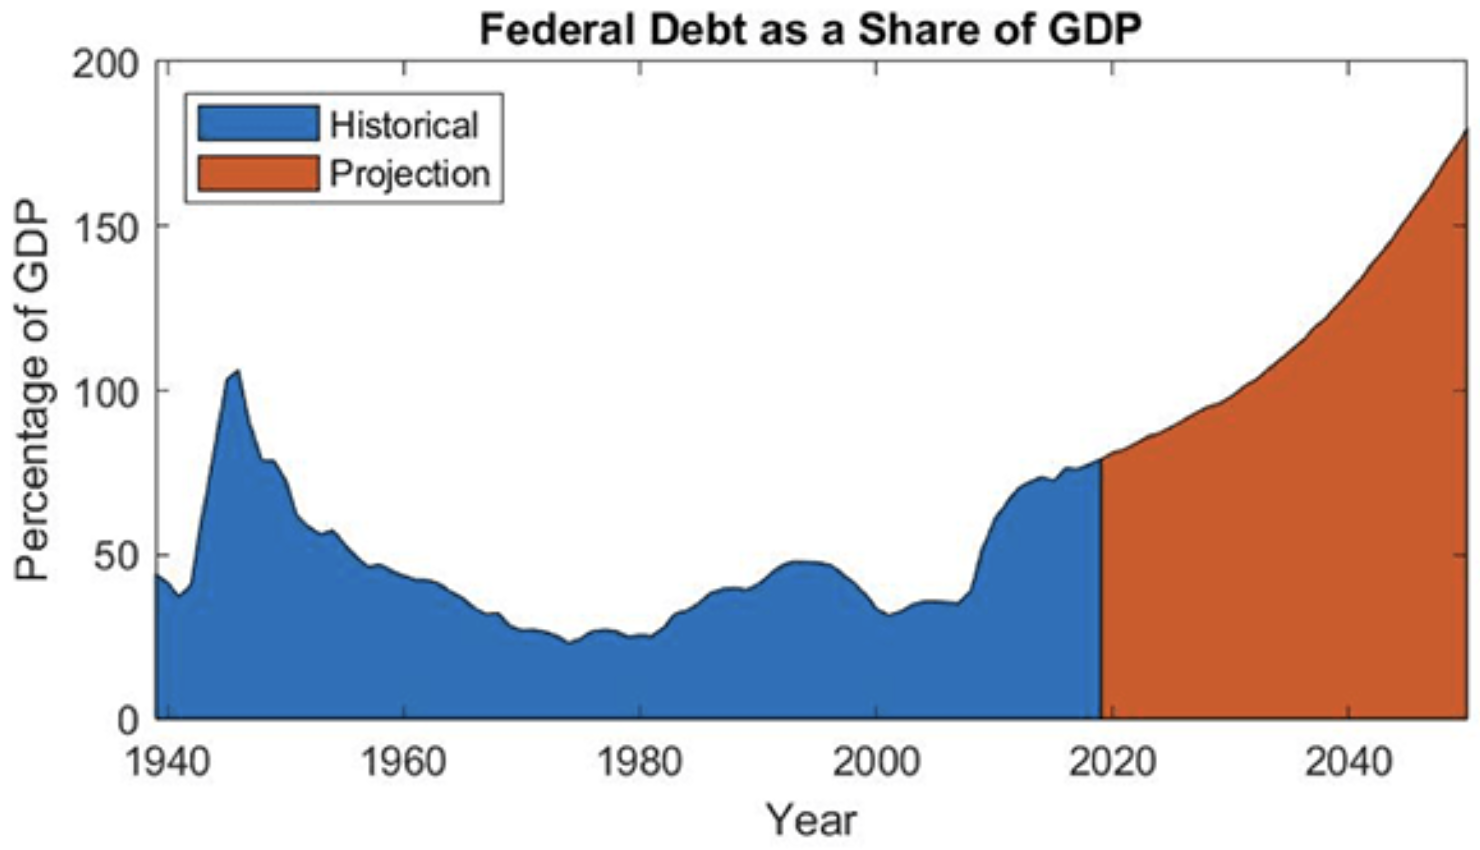 This graph shows historical and projected federal debt as a share of GDP over time.